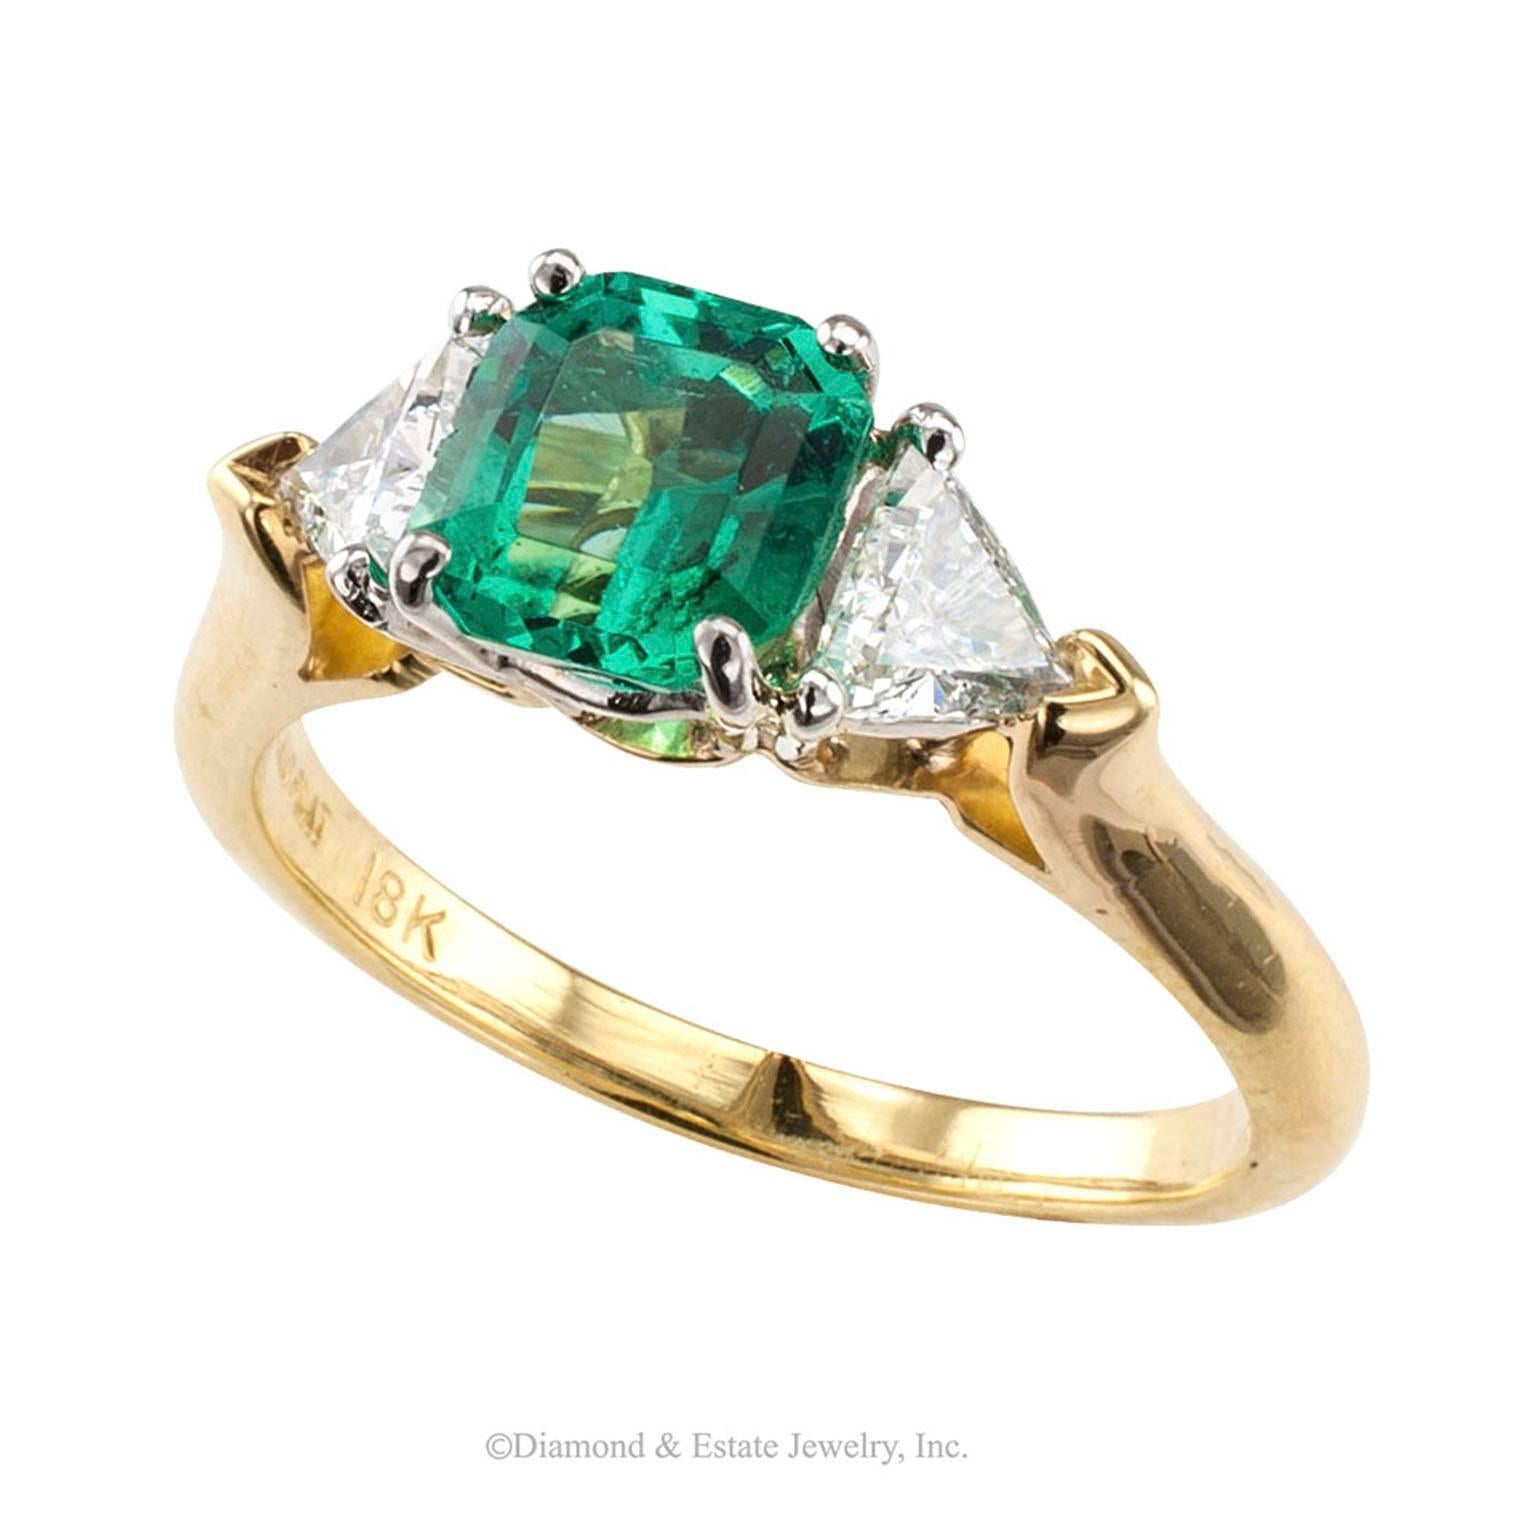 Emerald Diamond Three Stone Gold Platinum Ring

Three-stone emerald and diamond ring mounted in 18-karat gold and platinum.  The cushion-cut Colombian emerald taking center stage weighing approximately 1.00 carat, between a pair of trilliant-cut